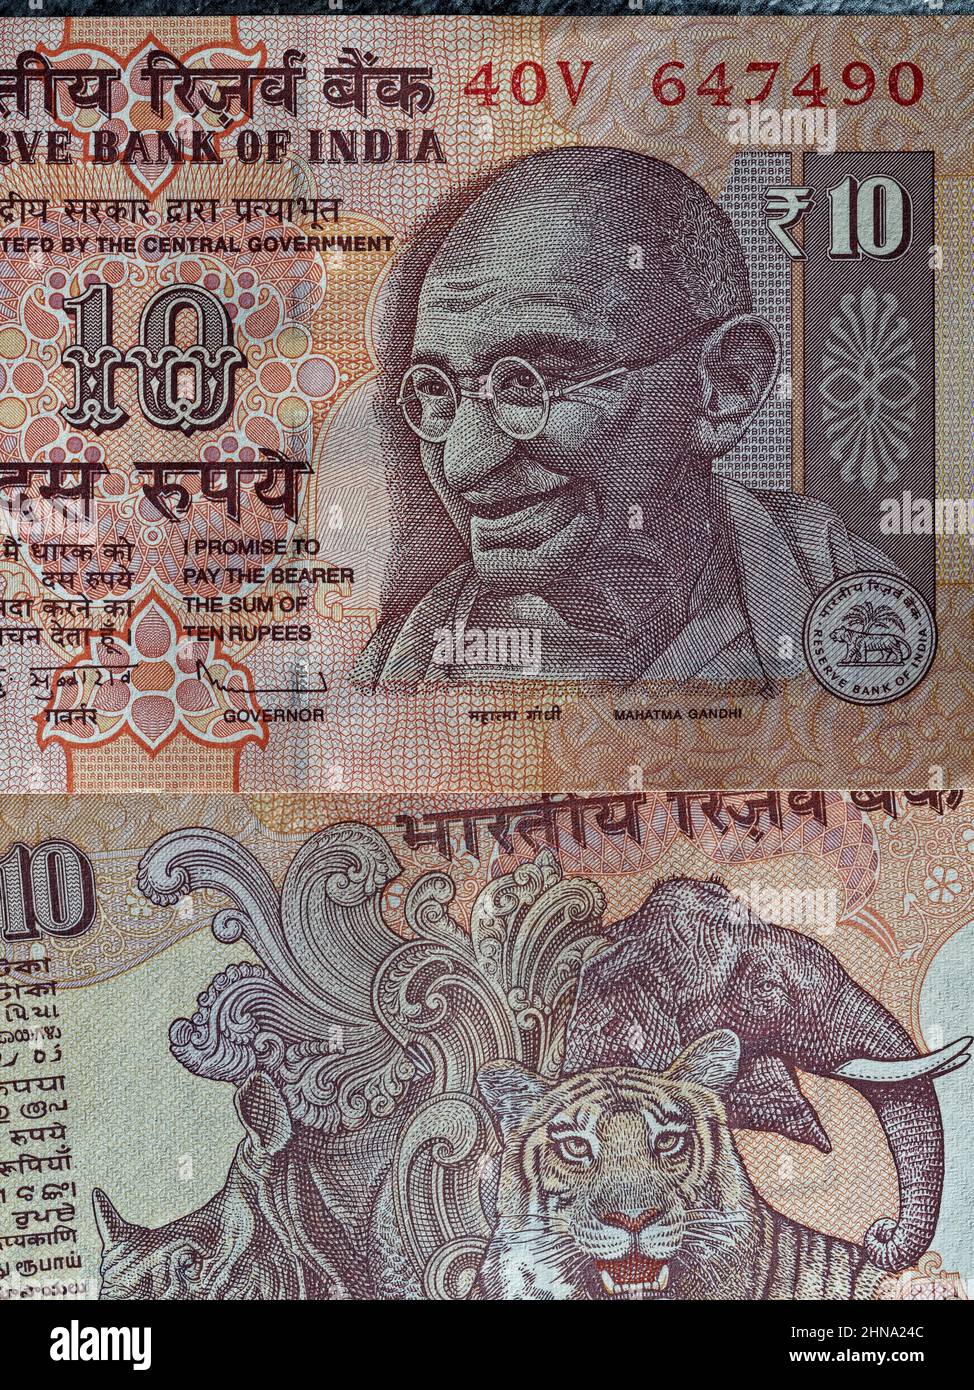 02 13 2022 Face of Mahatma Gandhi and reverse side Elephant Rhinoceros and tiger depicted  on Ten rupees bank note 10 rupee indian currency.Studio Sho Stock Photo